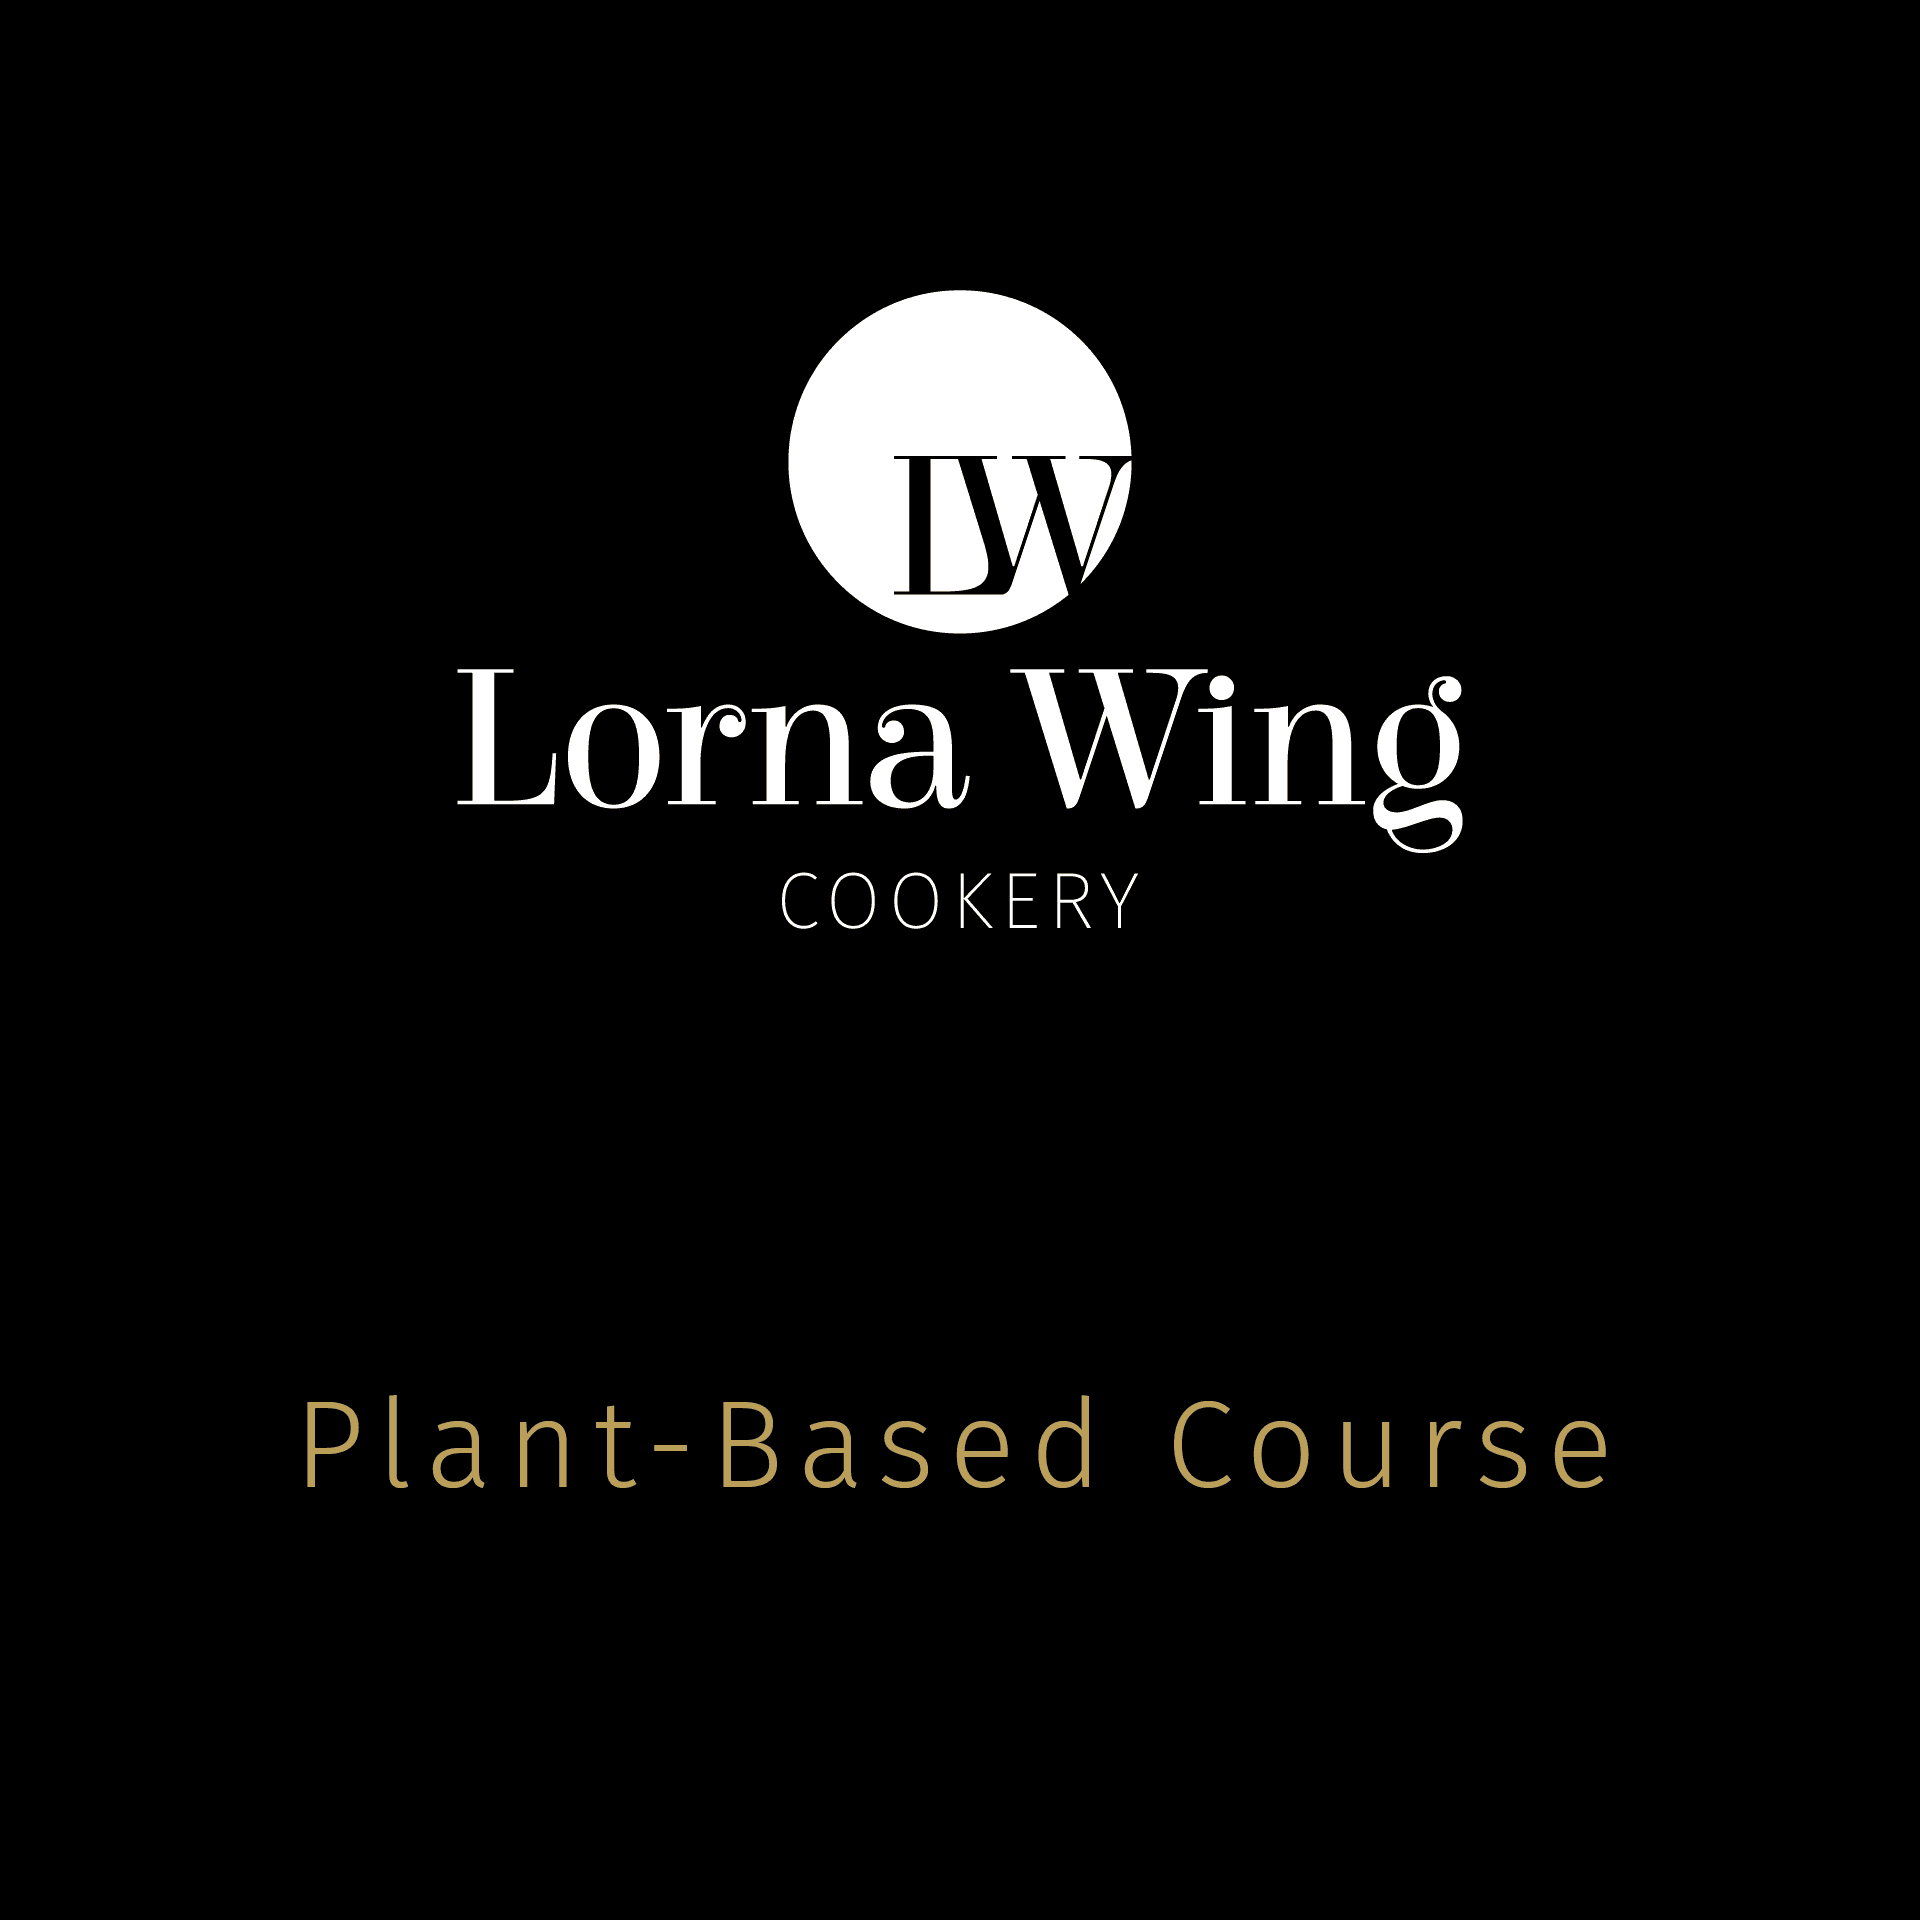 The Plant-Based Course